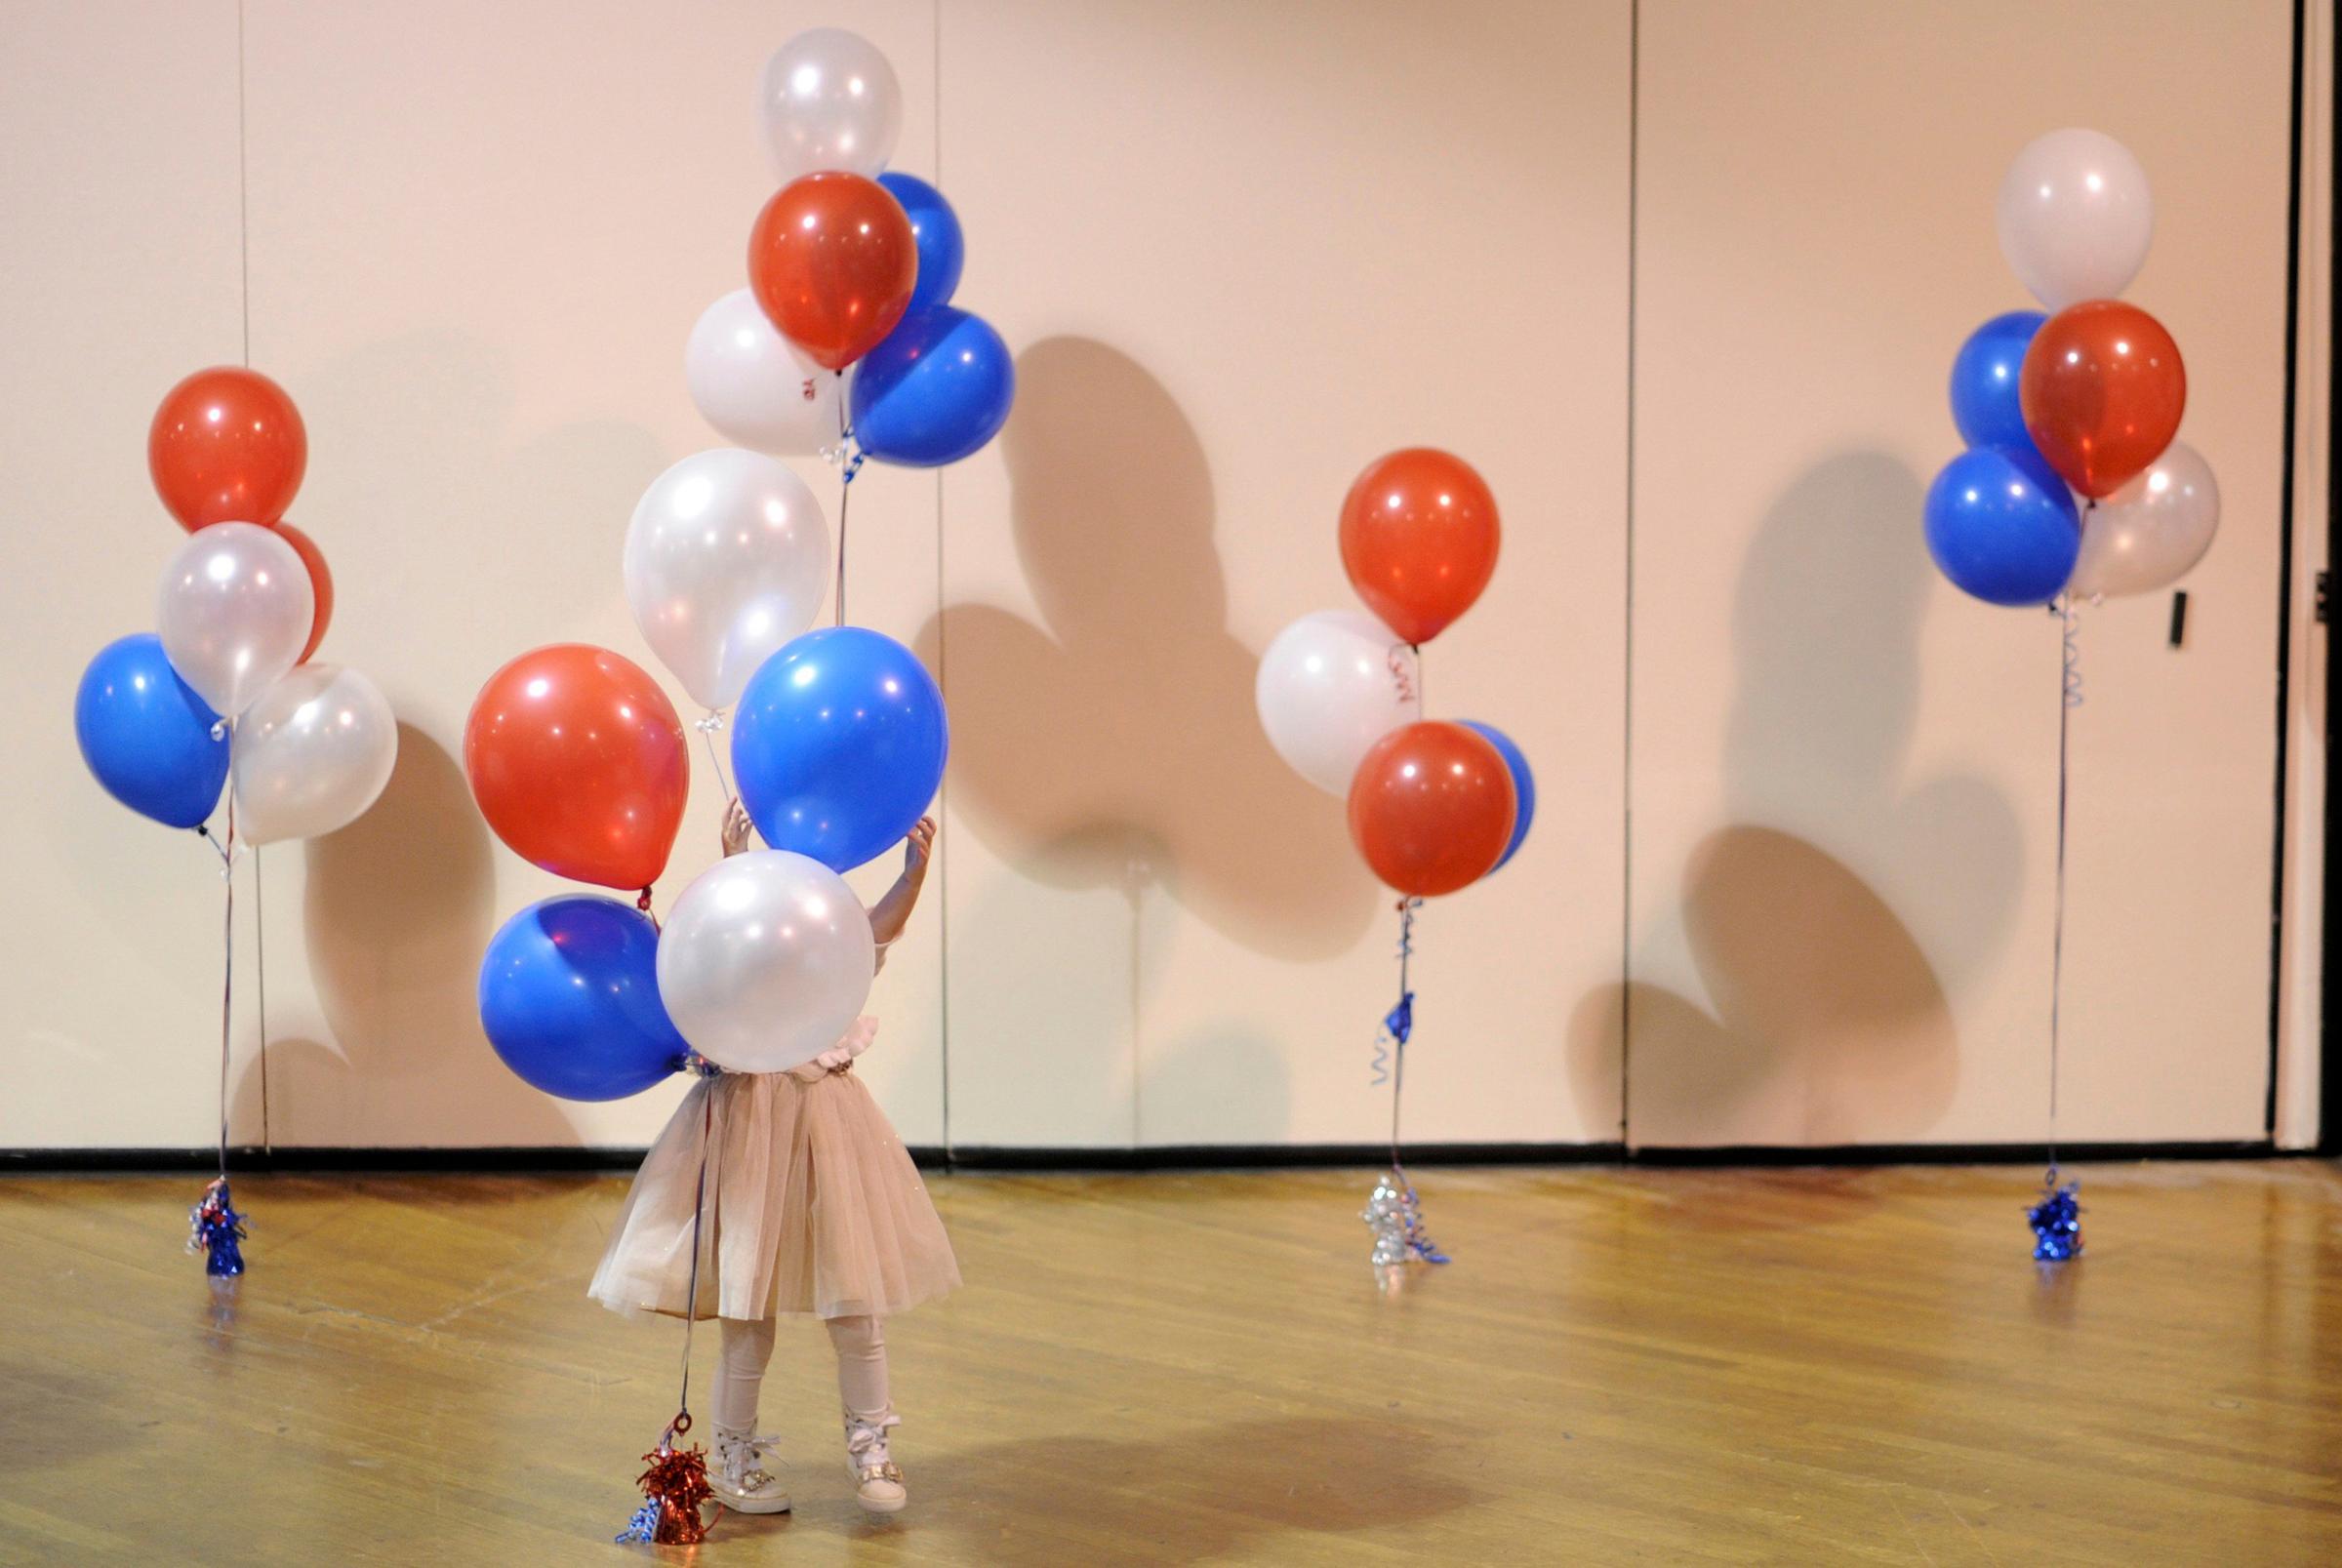 A little girl plays with balloons at Republican U.S. Senate candidate Scott Brown's midterm election night rally in Manchester, New Hampshire on Nov. 4, 2014.